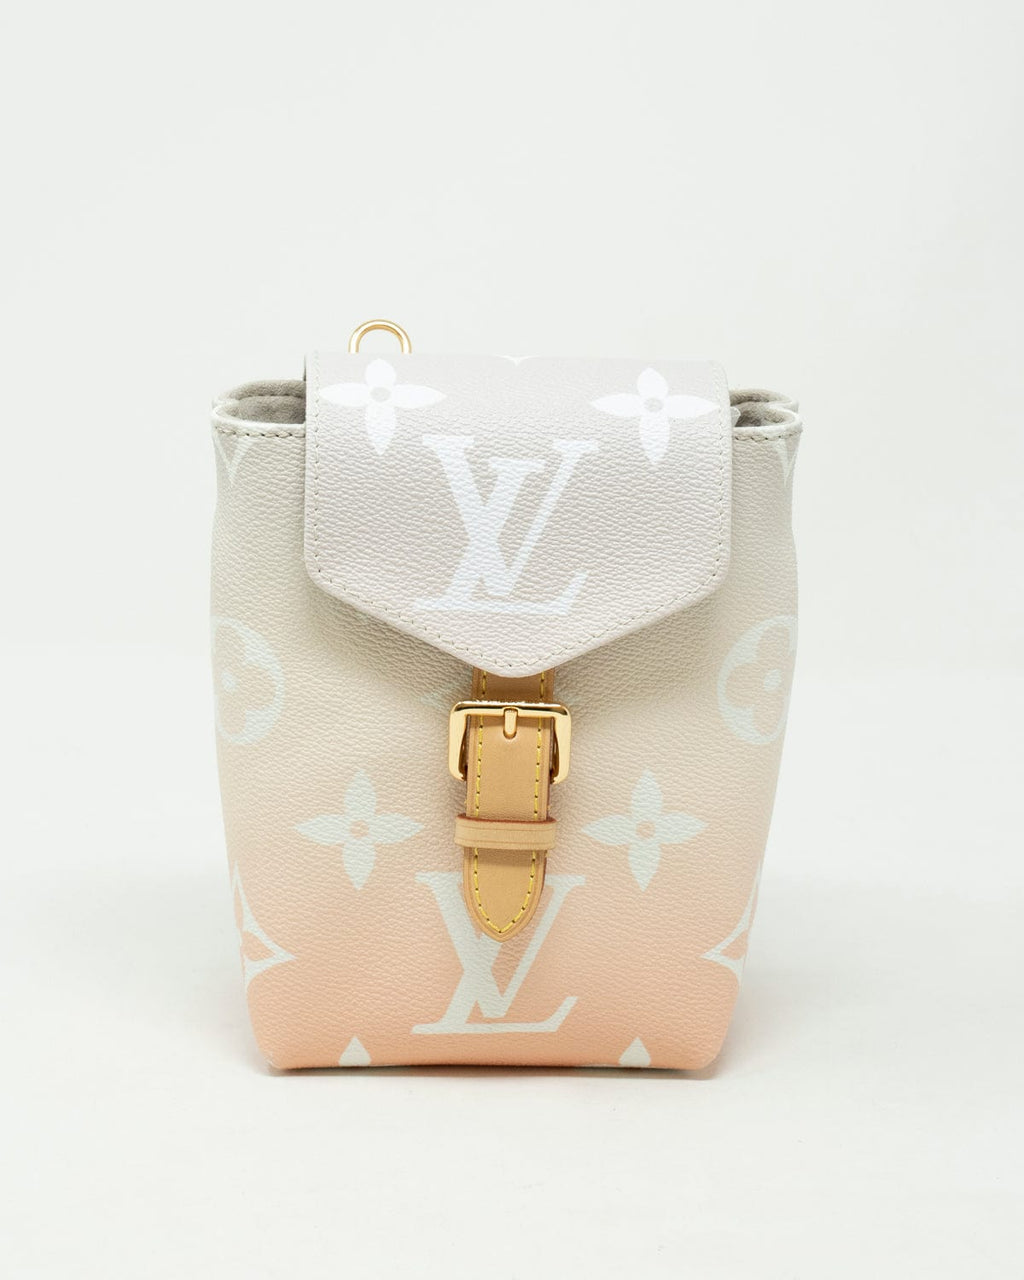 Louis Vuitton MONOGRAM 2021 SS Tiny Backpack (M45764)